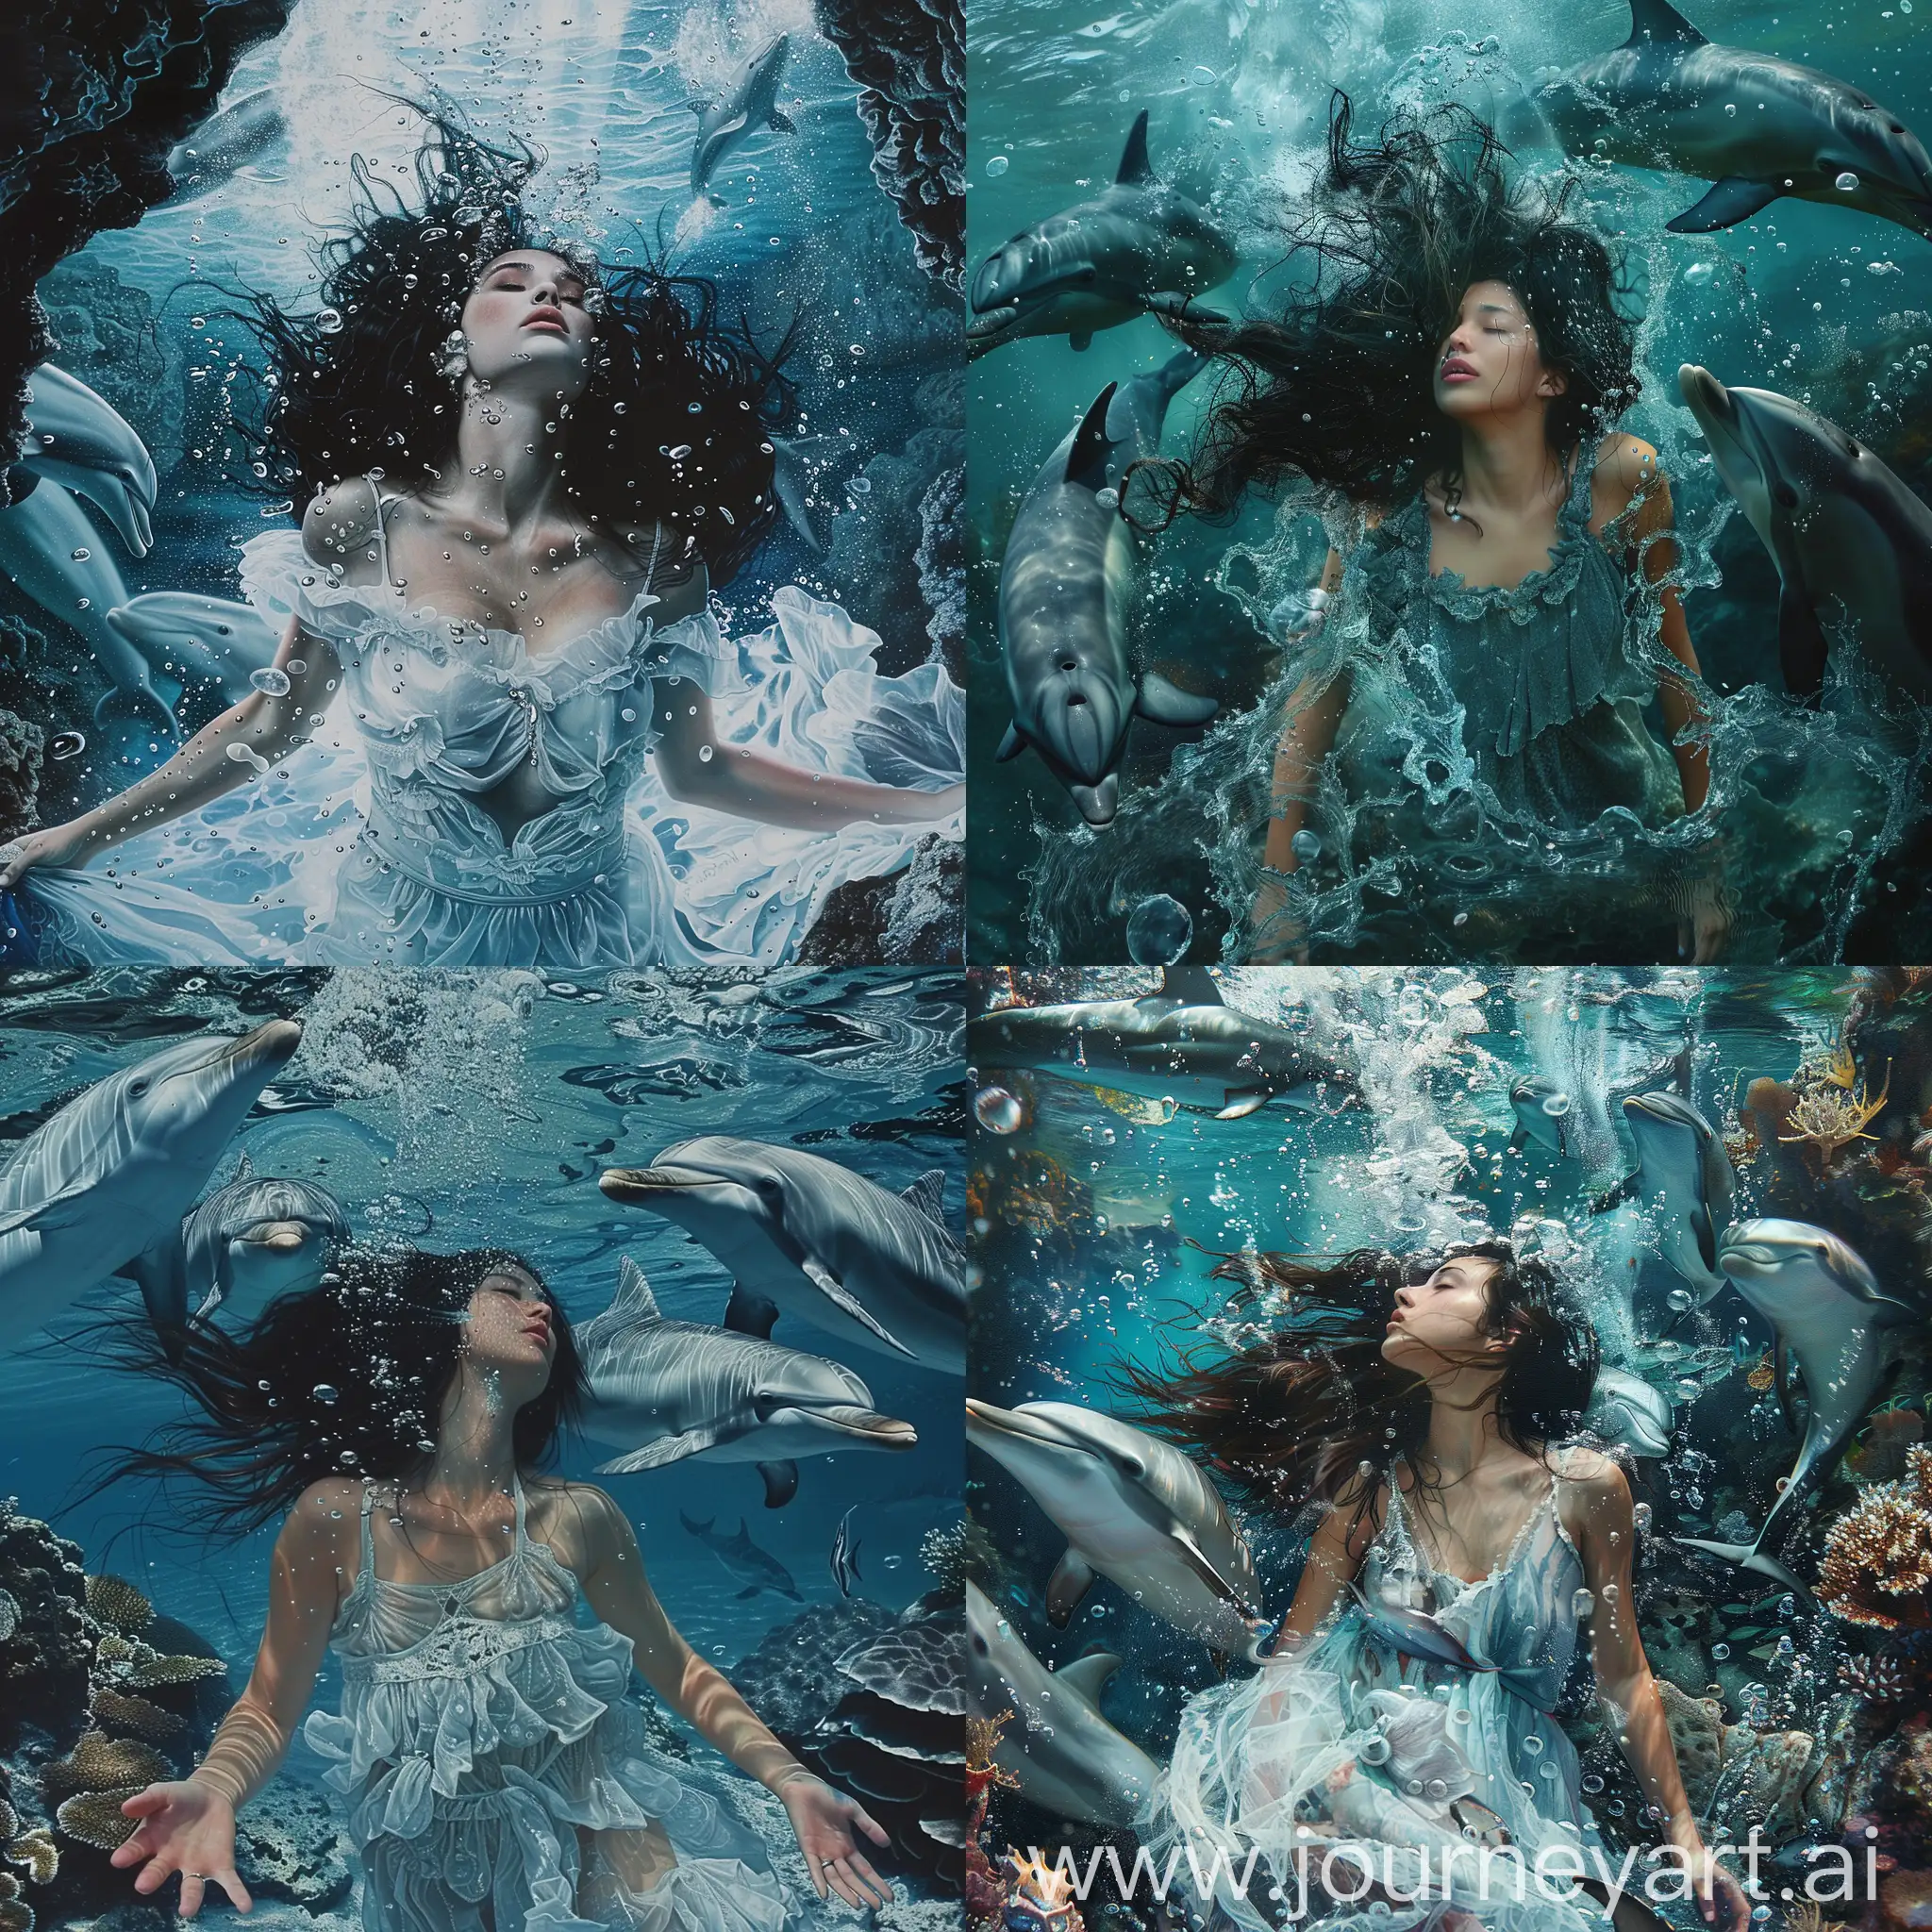 Underwater-Portrait-of-Woman-in-Dress-Surrounded-by-Dolphins-and-Coral